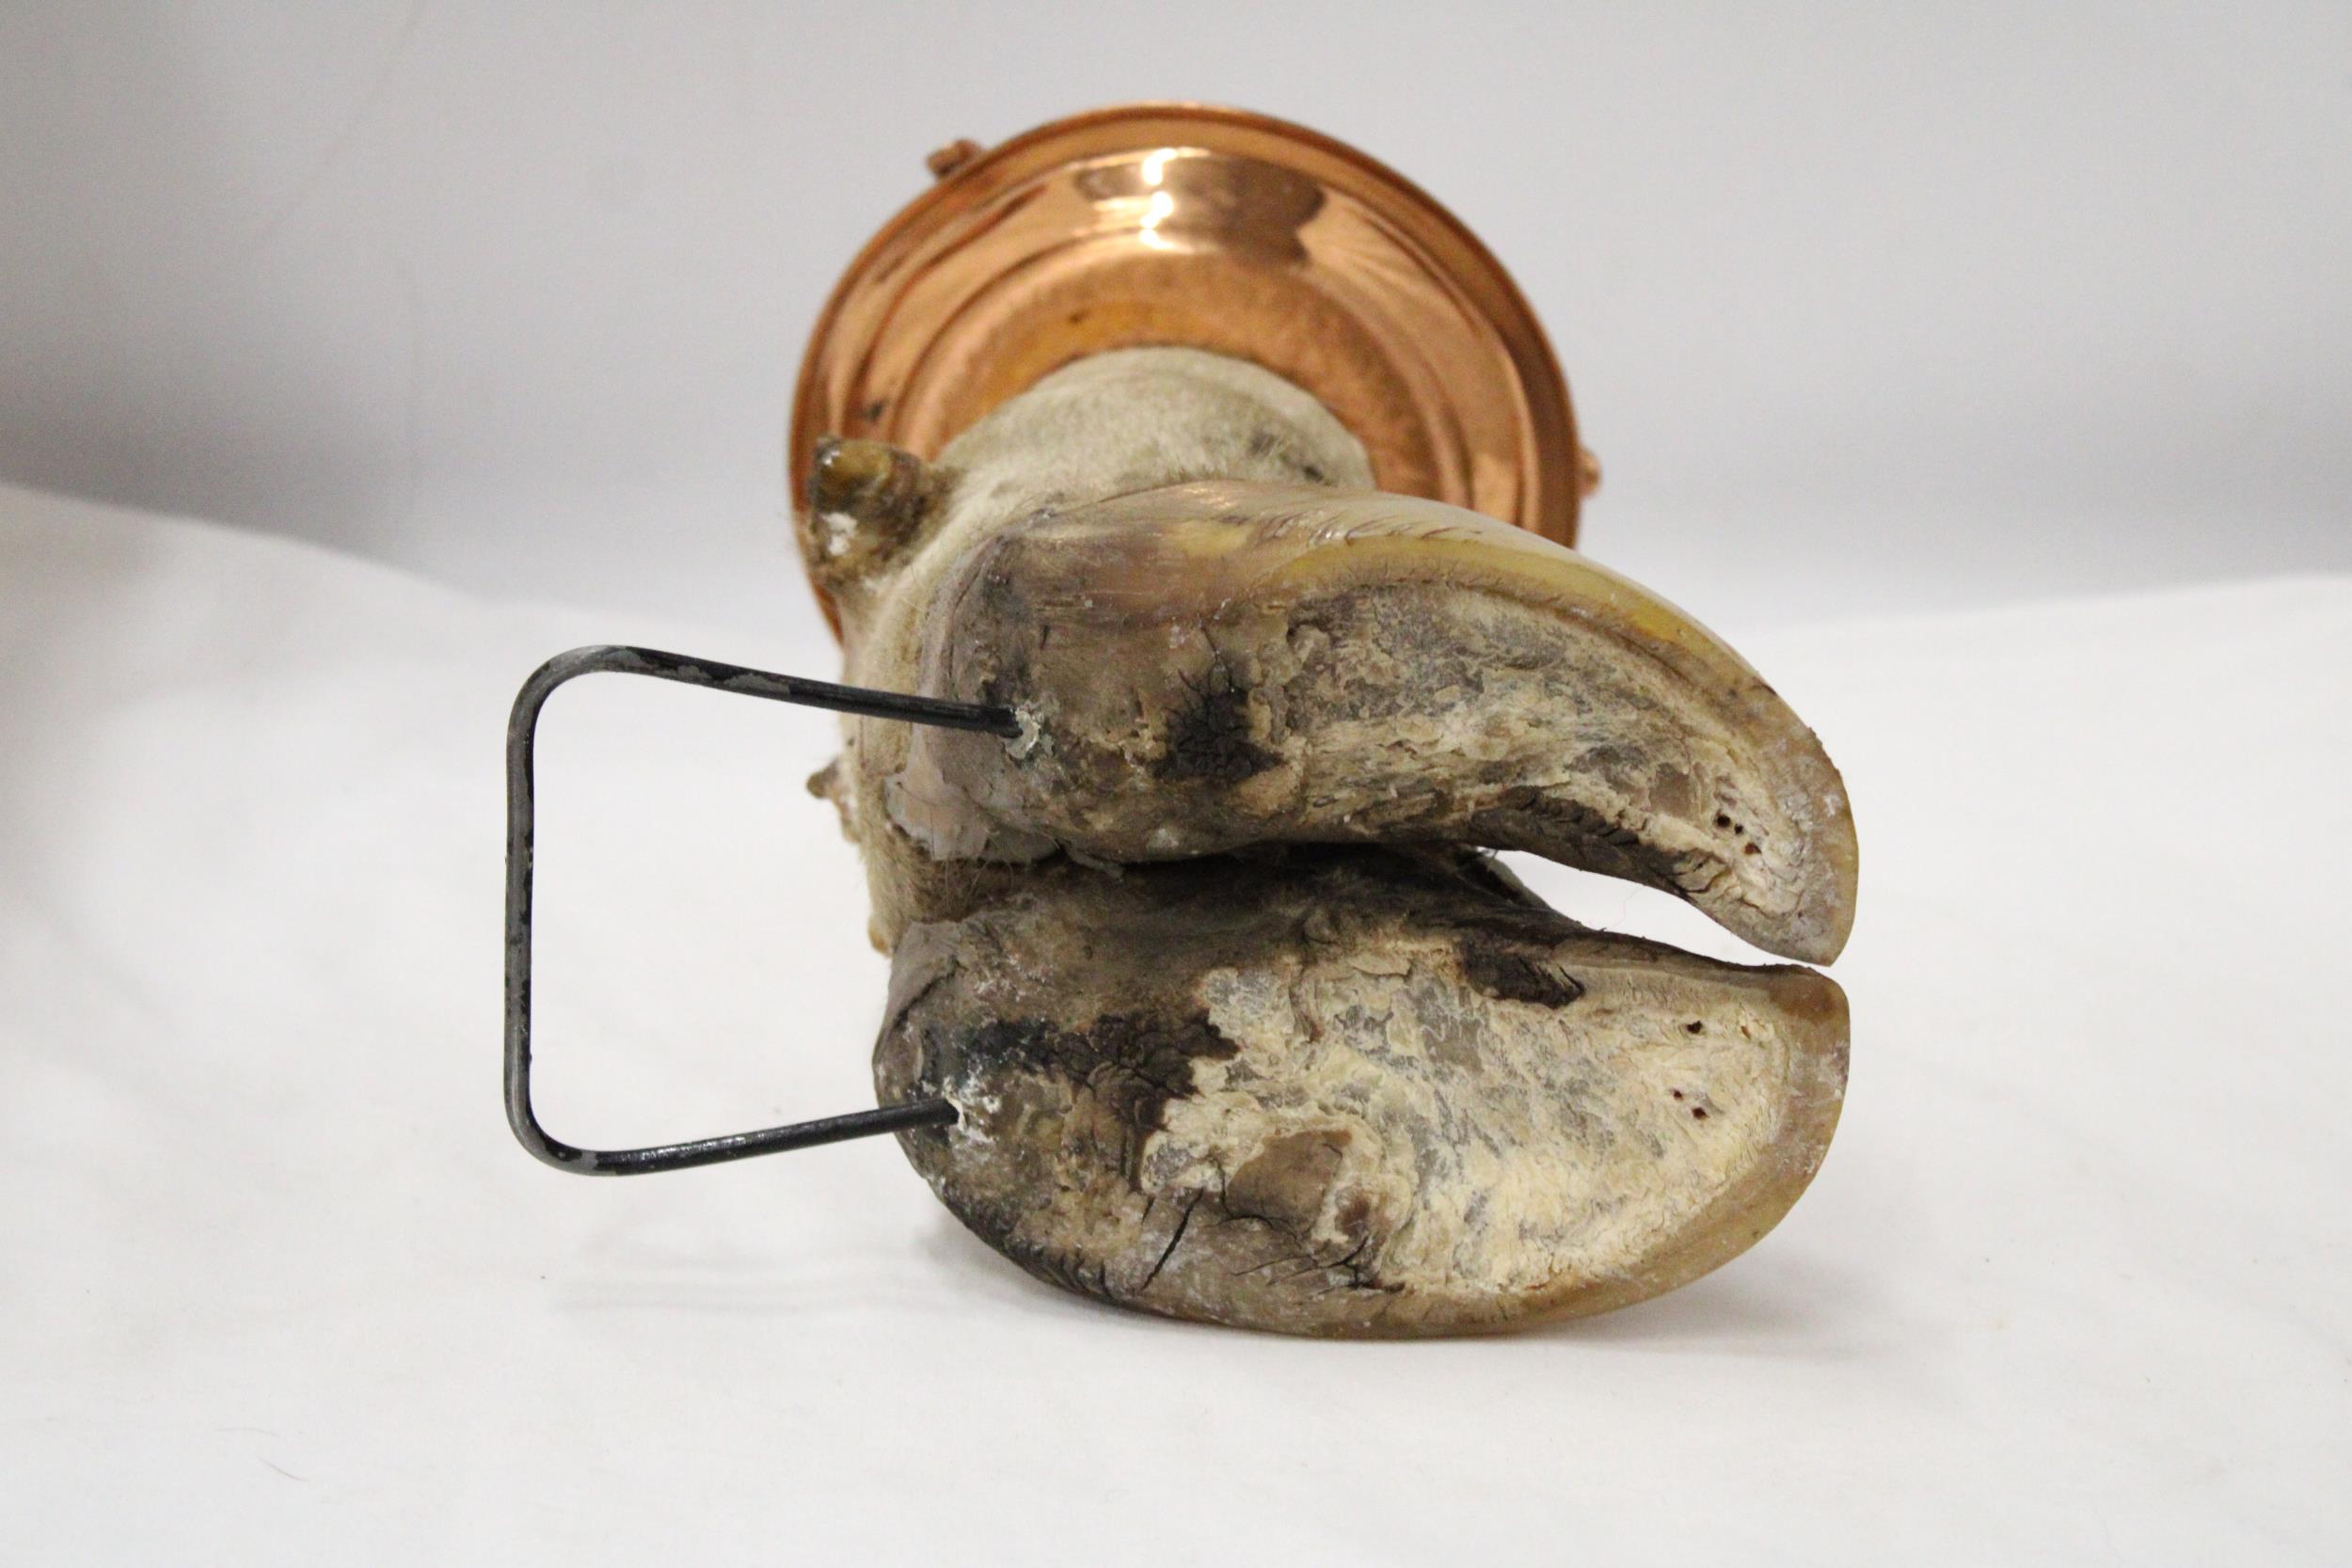 A COWS HOOF WITH COPPER ASHTRAY - Image 6 of 6